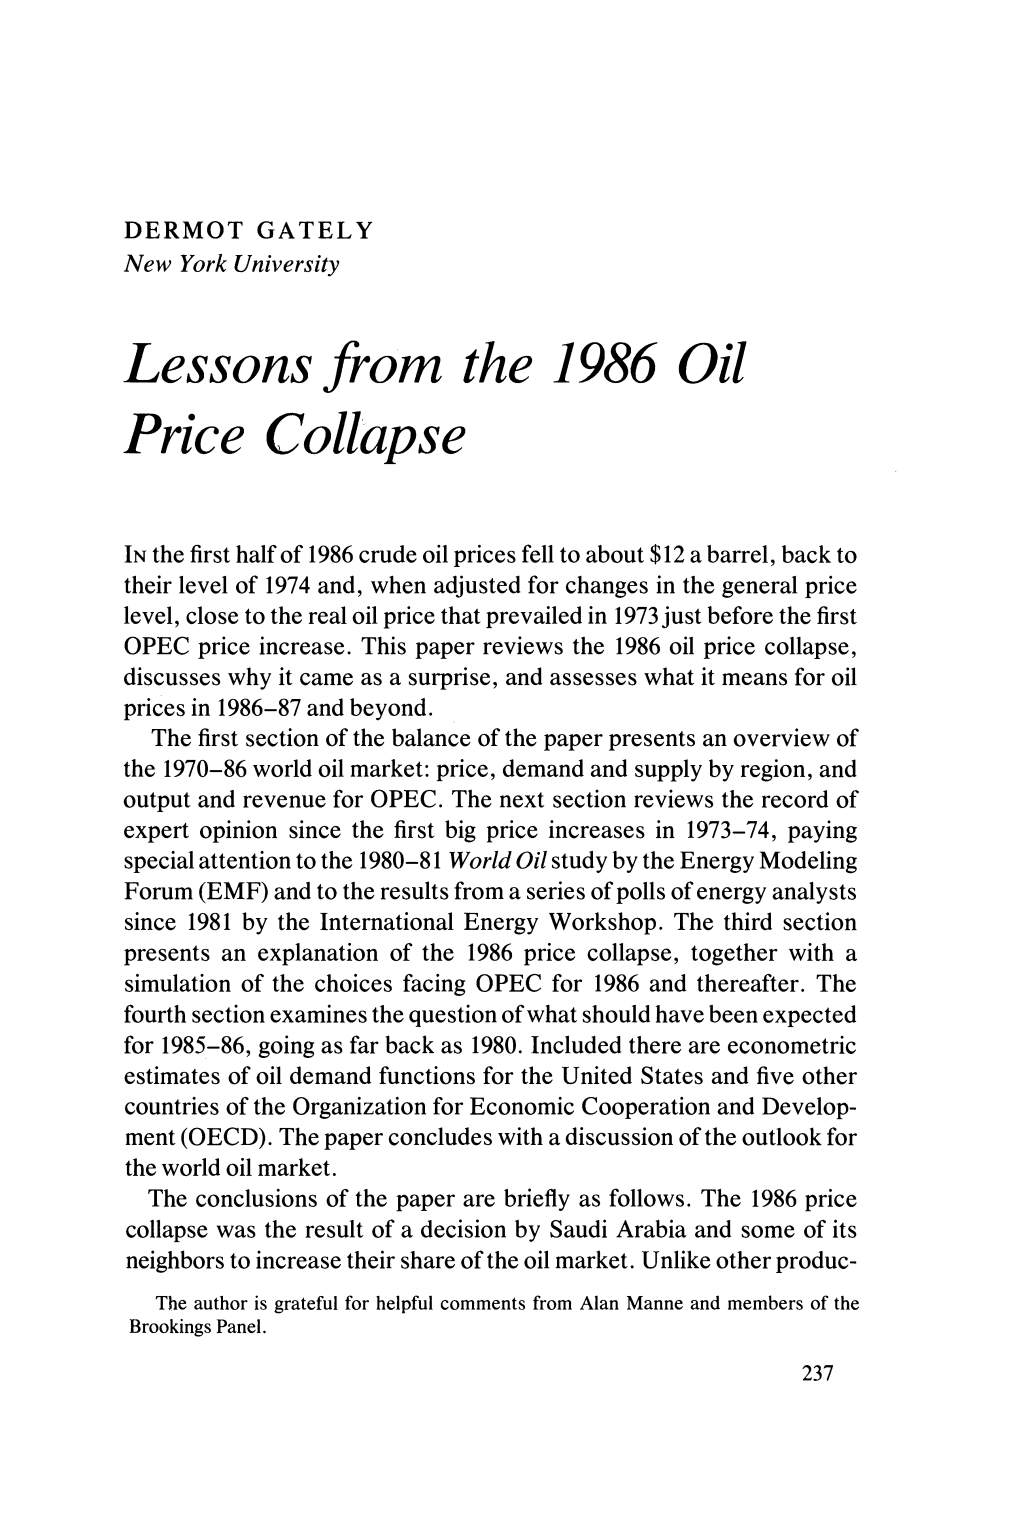 Lessons from the 1986 Oil Price Collapse